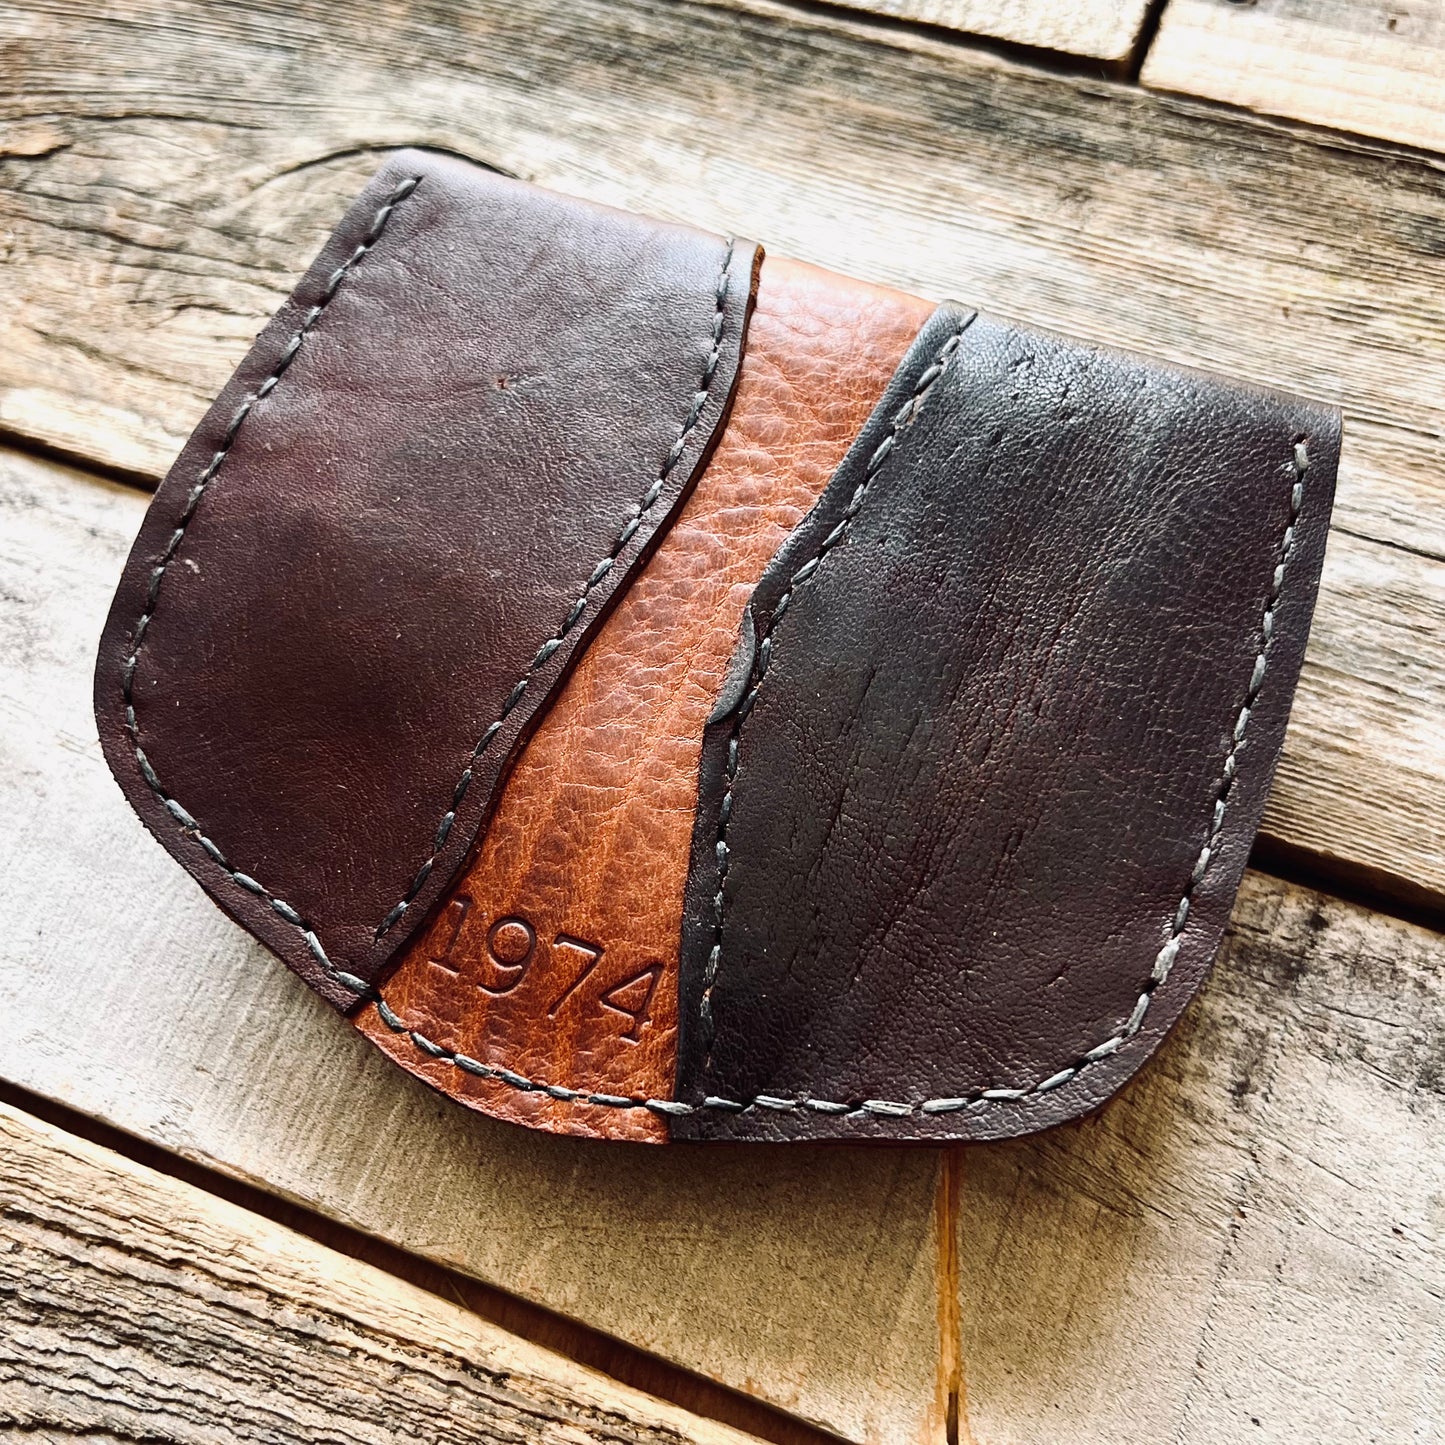 1974 Thames River Wallet in Chestnut & Hickory and 1974 branded into the leather on the back